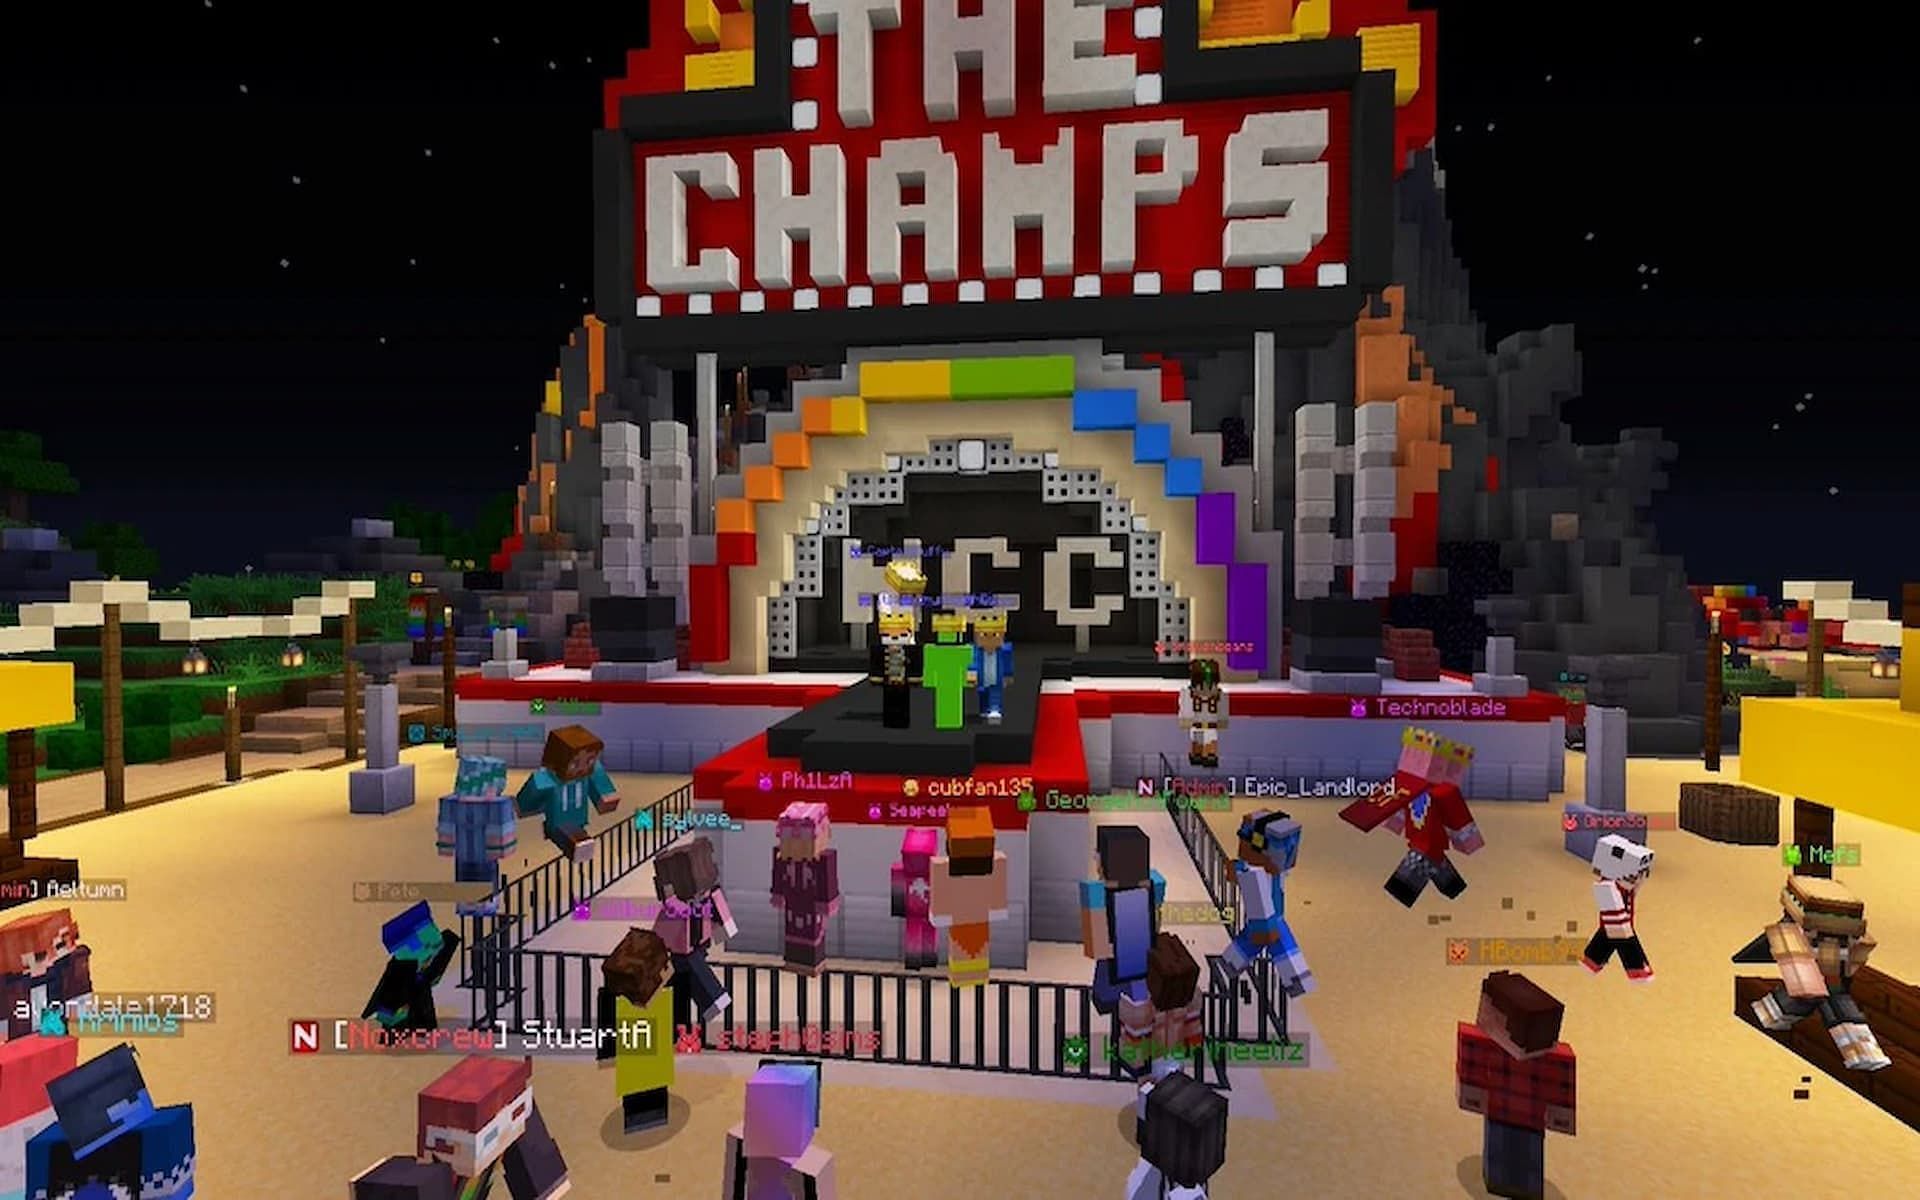 Fans can look forward to the upcoming Minecraft Championship (MCC) 31 (Image via MinecraftChampionship.Fandom.com)